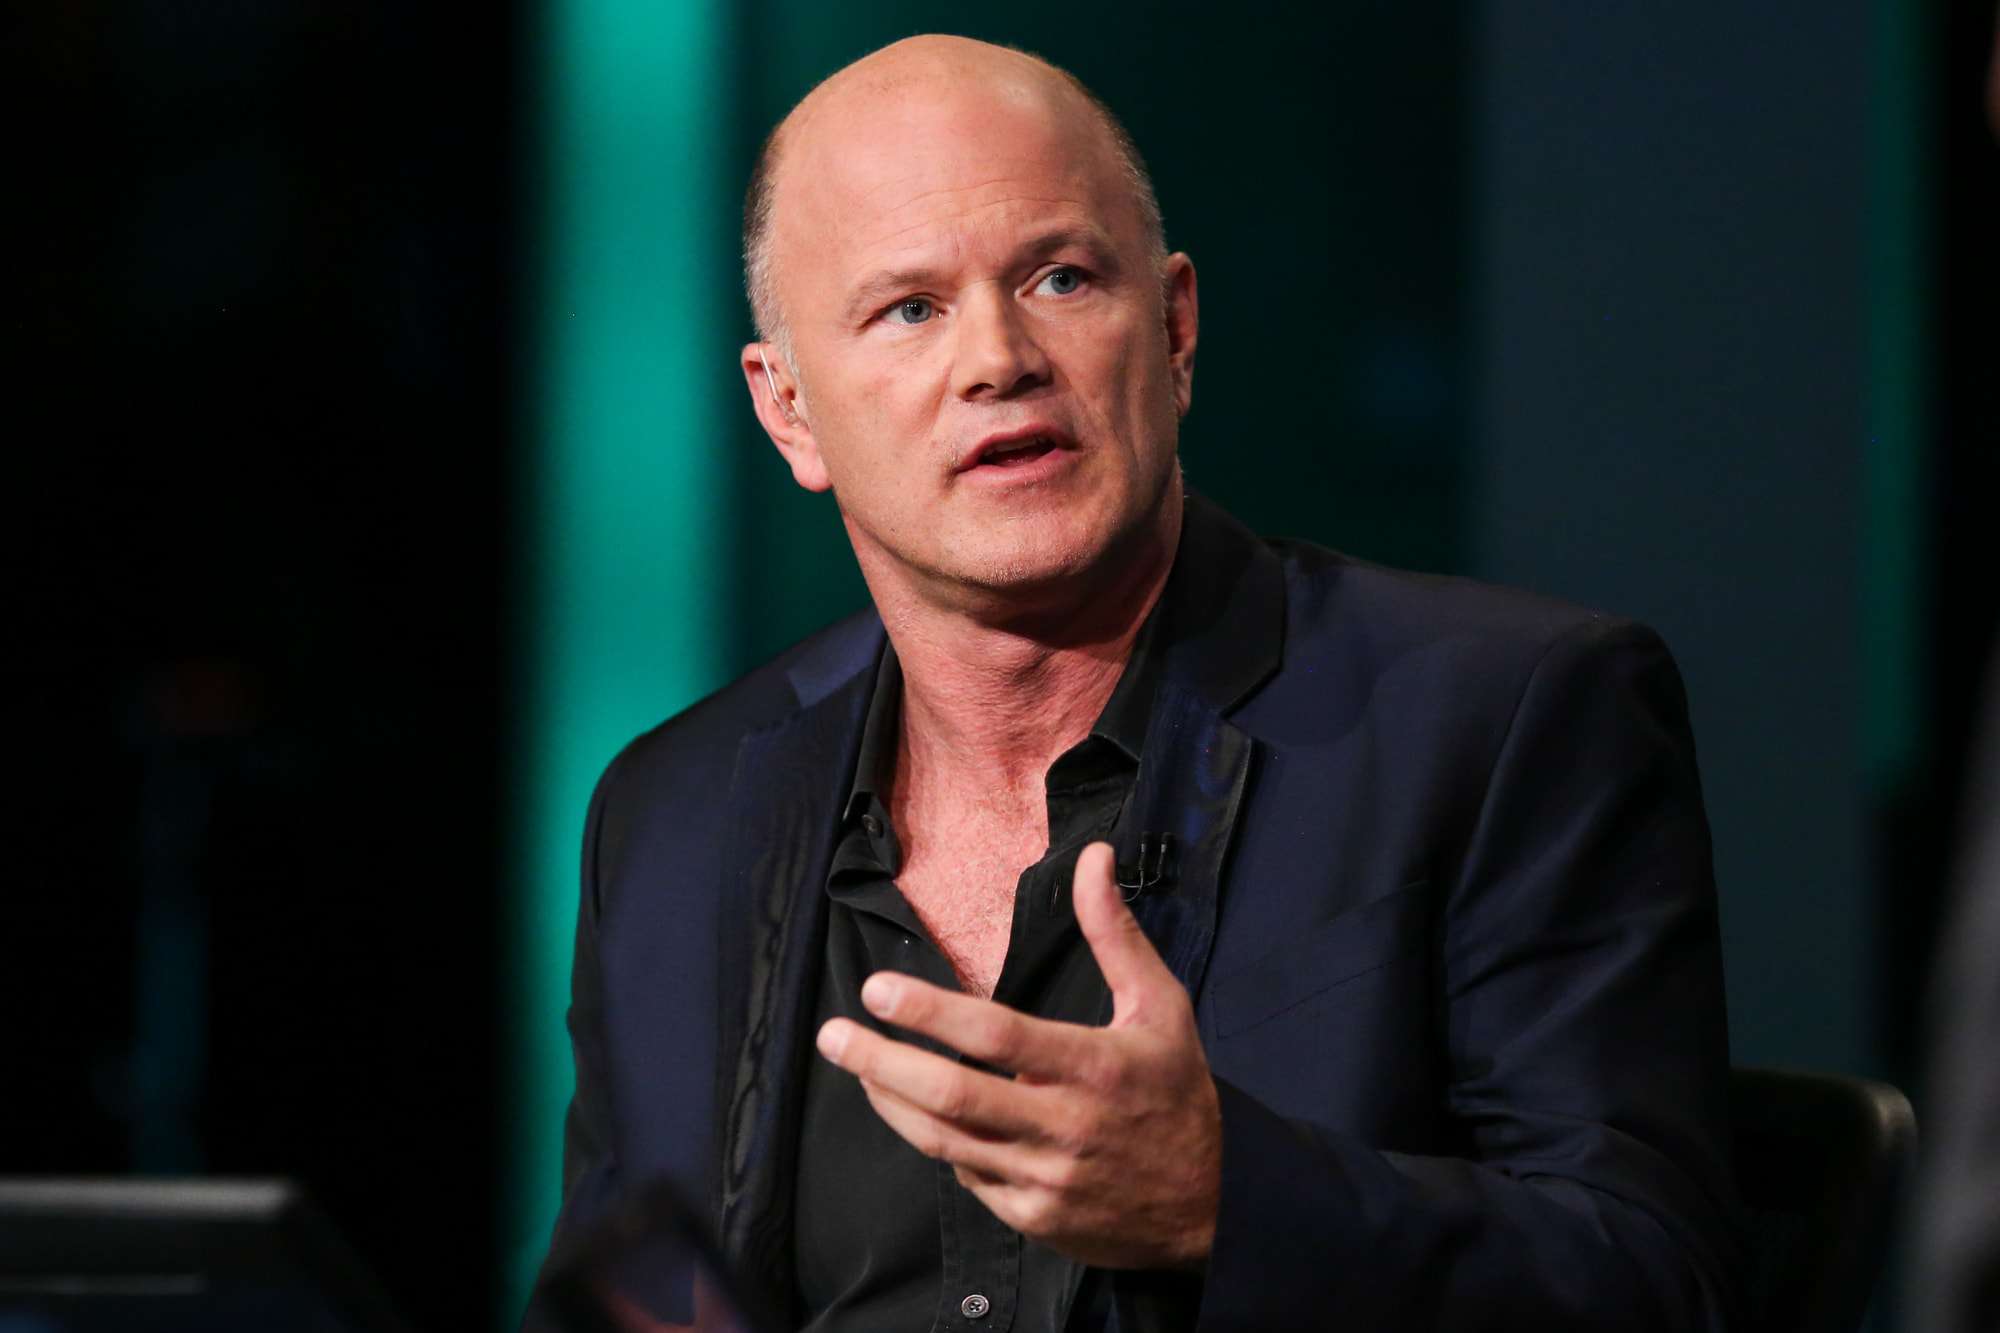 Mike-novogratz:-bitcoin-will-be-digital-gold-for-3,000-years-but-ethereum-can-surpass-it